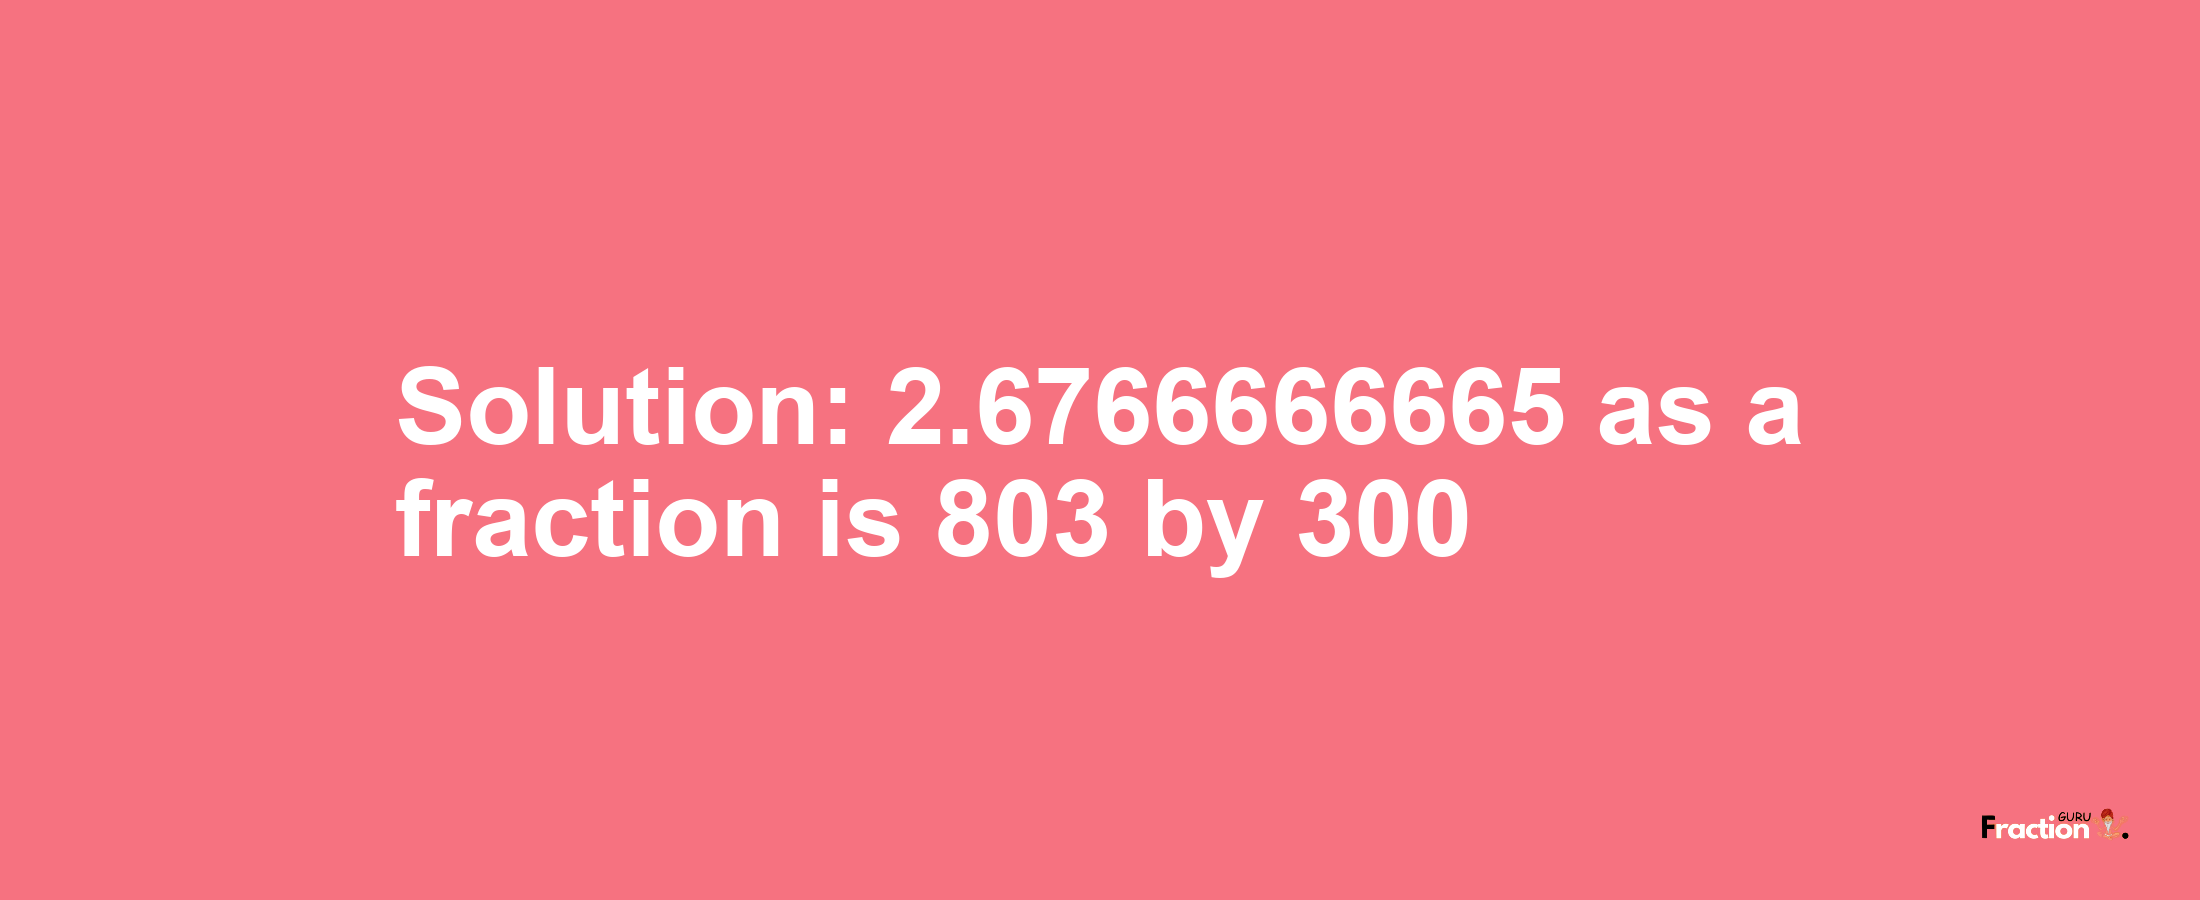 Solution:2.6766666665 as a fraction is 803/300